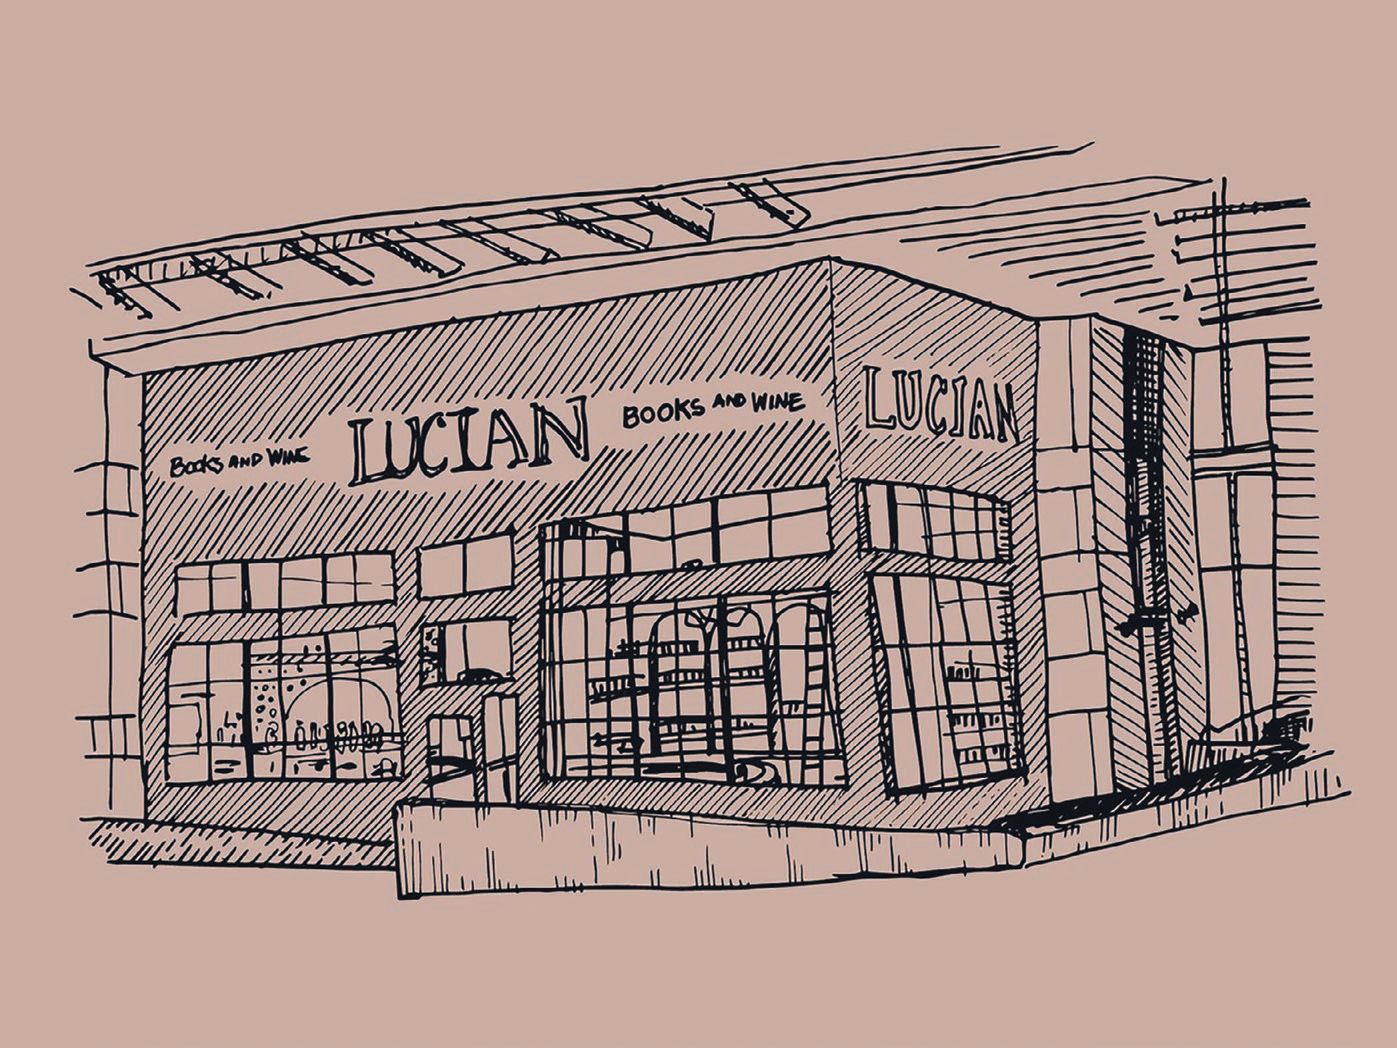 An illustration of the soon-to-be location of Lucian Books and Wine.